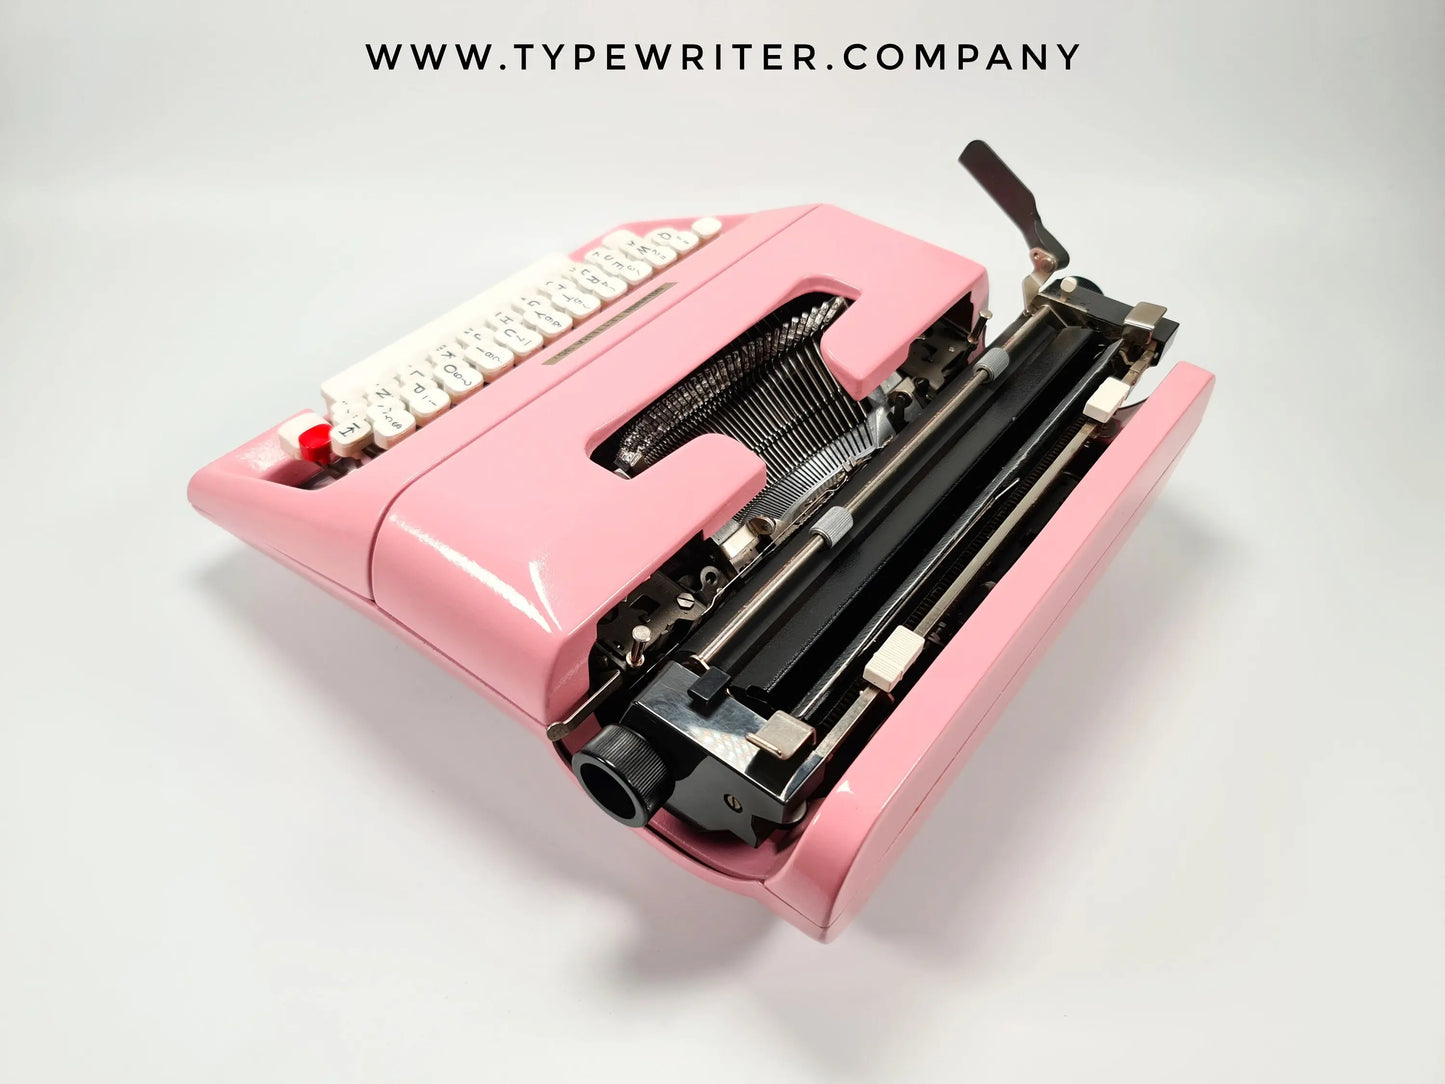 SALE! - Limited Edition Olivetti Lettera 35 Orchid Pink, Vintage, Mint Condition, Professionally Serviced - ElGranero Typewriter.Company